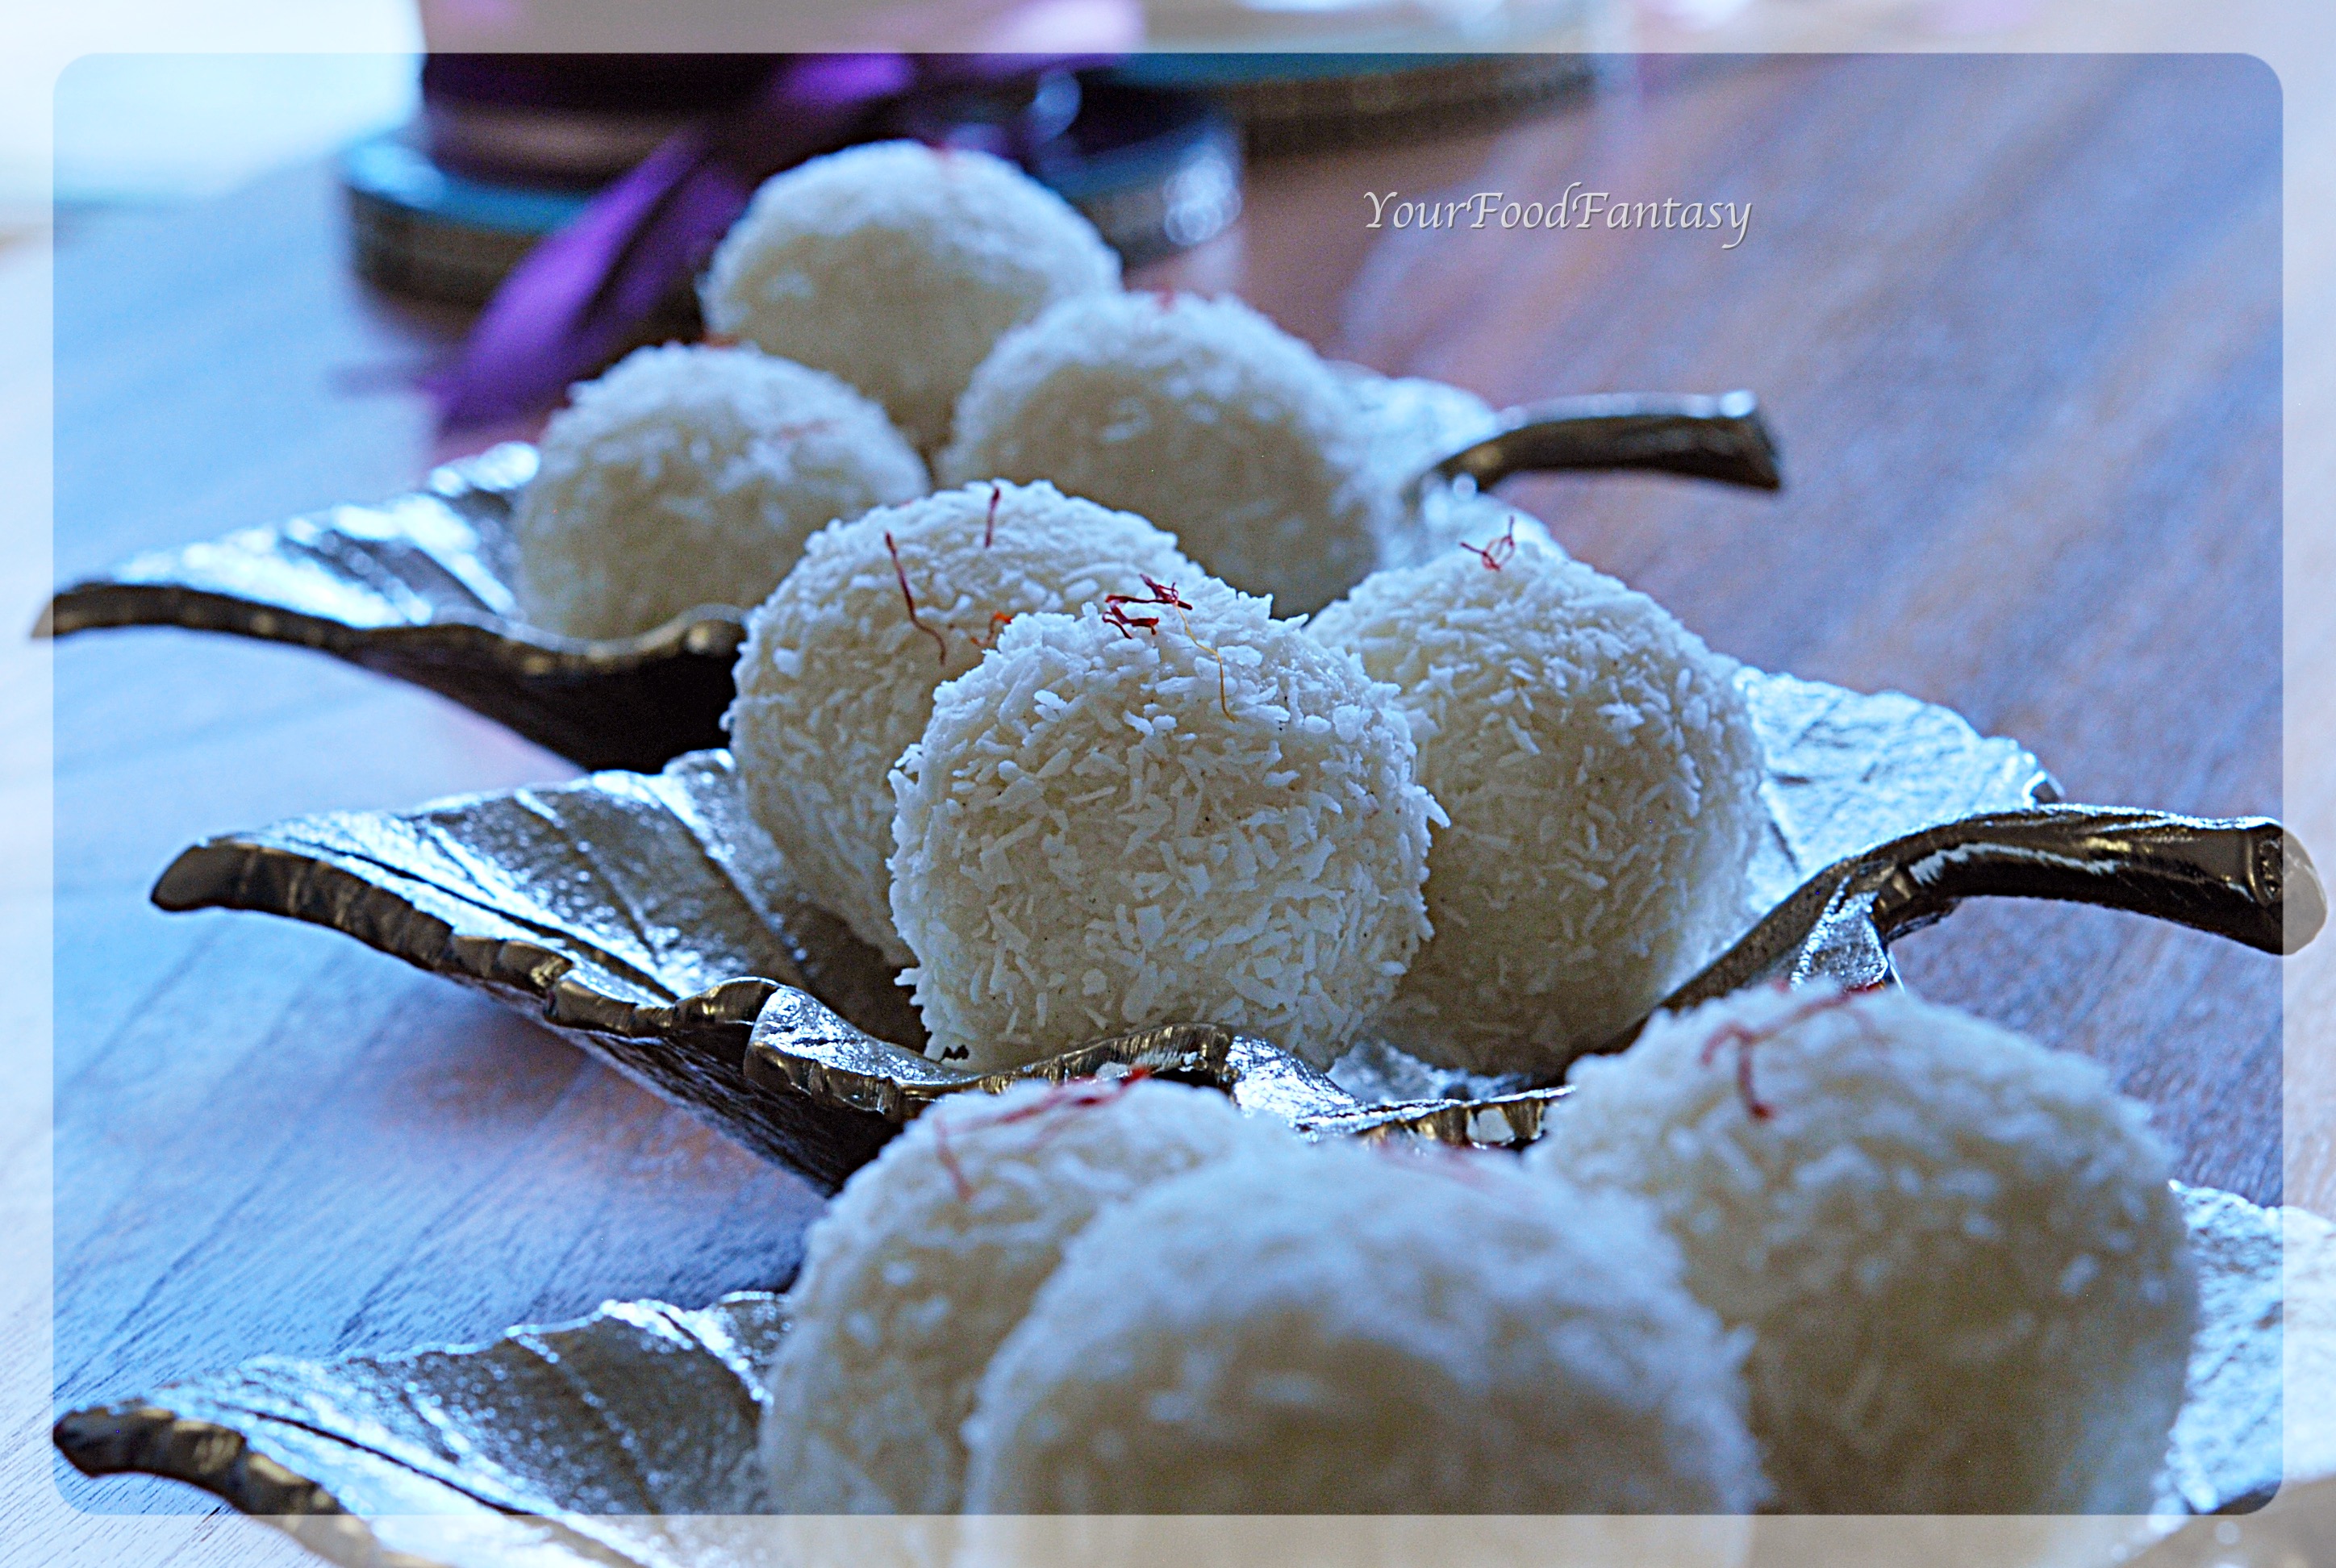 Instant coconut ladoo with desiccated coconut at yourfoodfantasy.com by meenu gupta | Like us on https://www.facebook.com/yourfoodfantasy